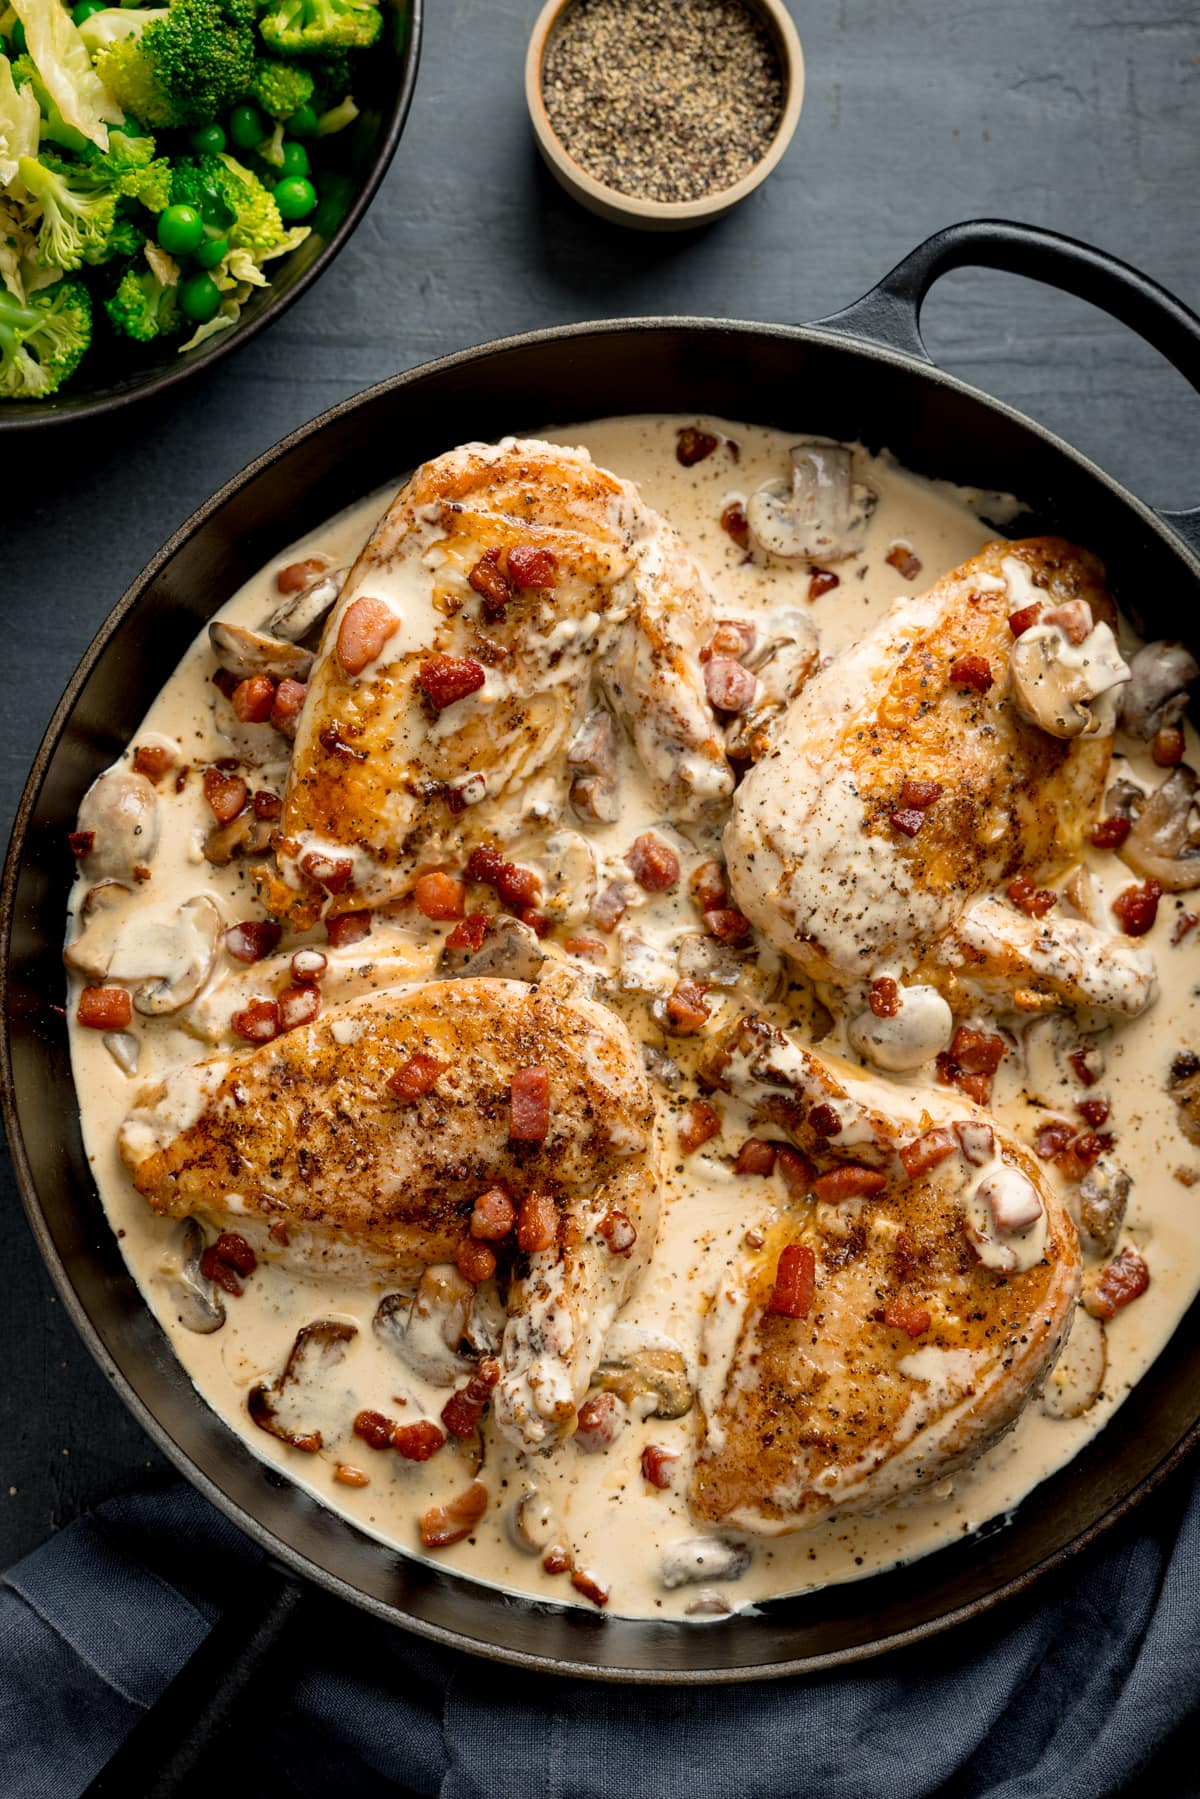 Tall overhead image of chicken supreme with mushrooms and pancetta in a black pan. There are four chicken supremes in the pan. The pan is on a dark background next to a dark napkin, a bowl of green veg and a pinch pot of black pepper.